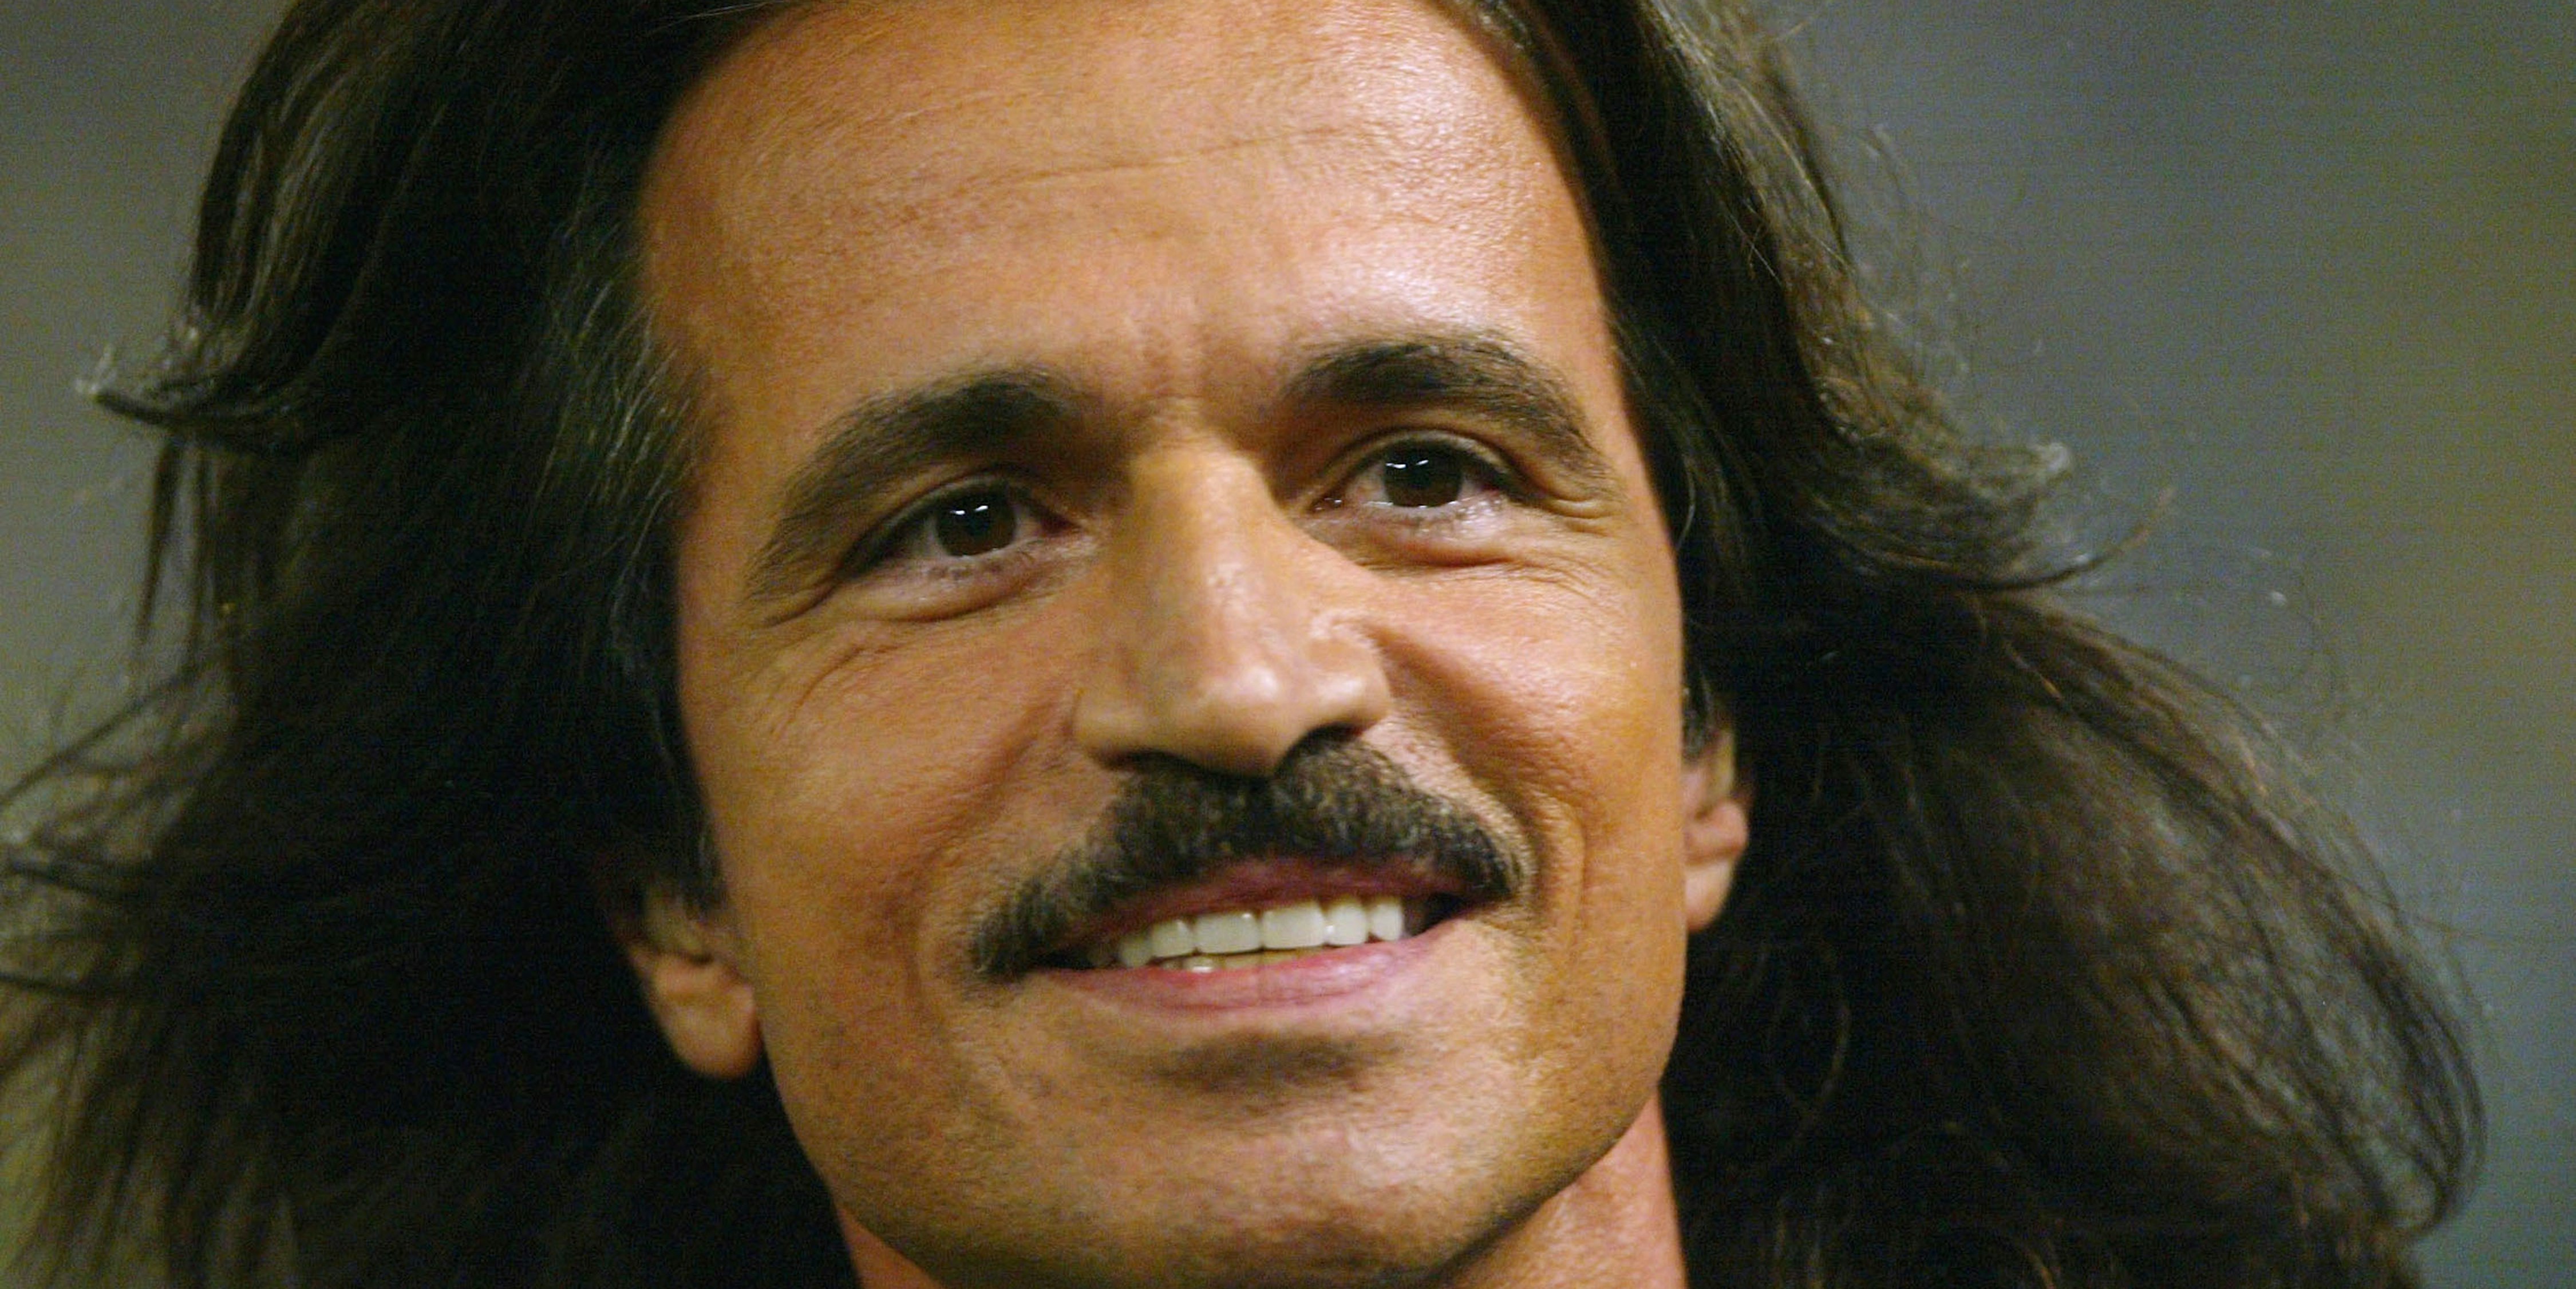 Resident Nasa Composer Yanni Imagines A Sexier Future With Sensuous